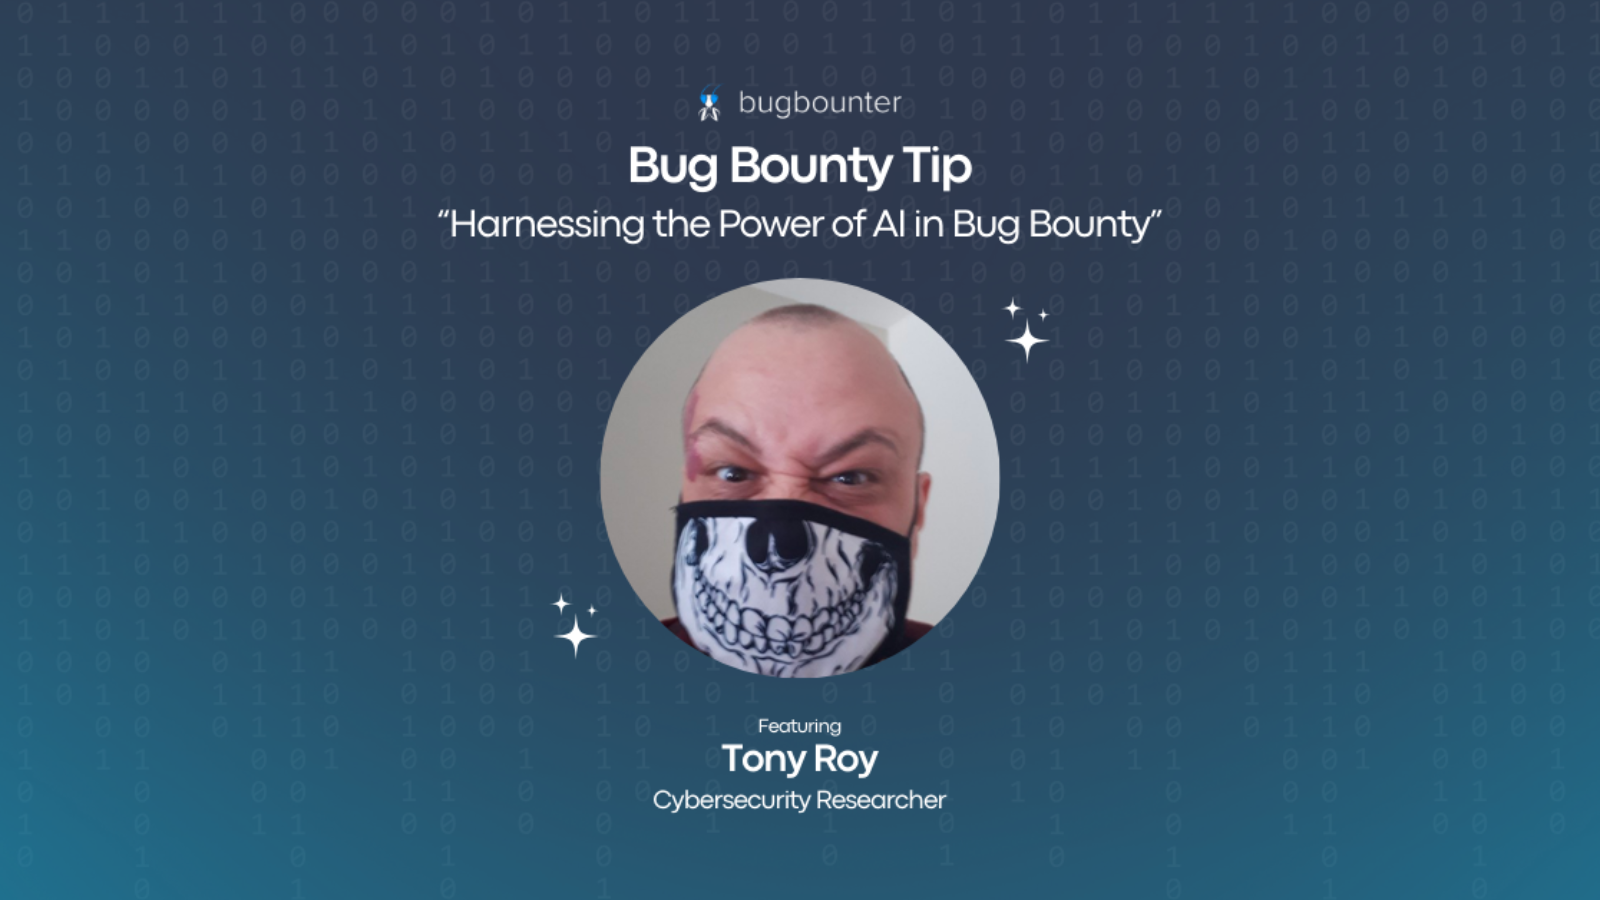 bug bounty tip: harness the power of AI in bug bounty